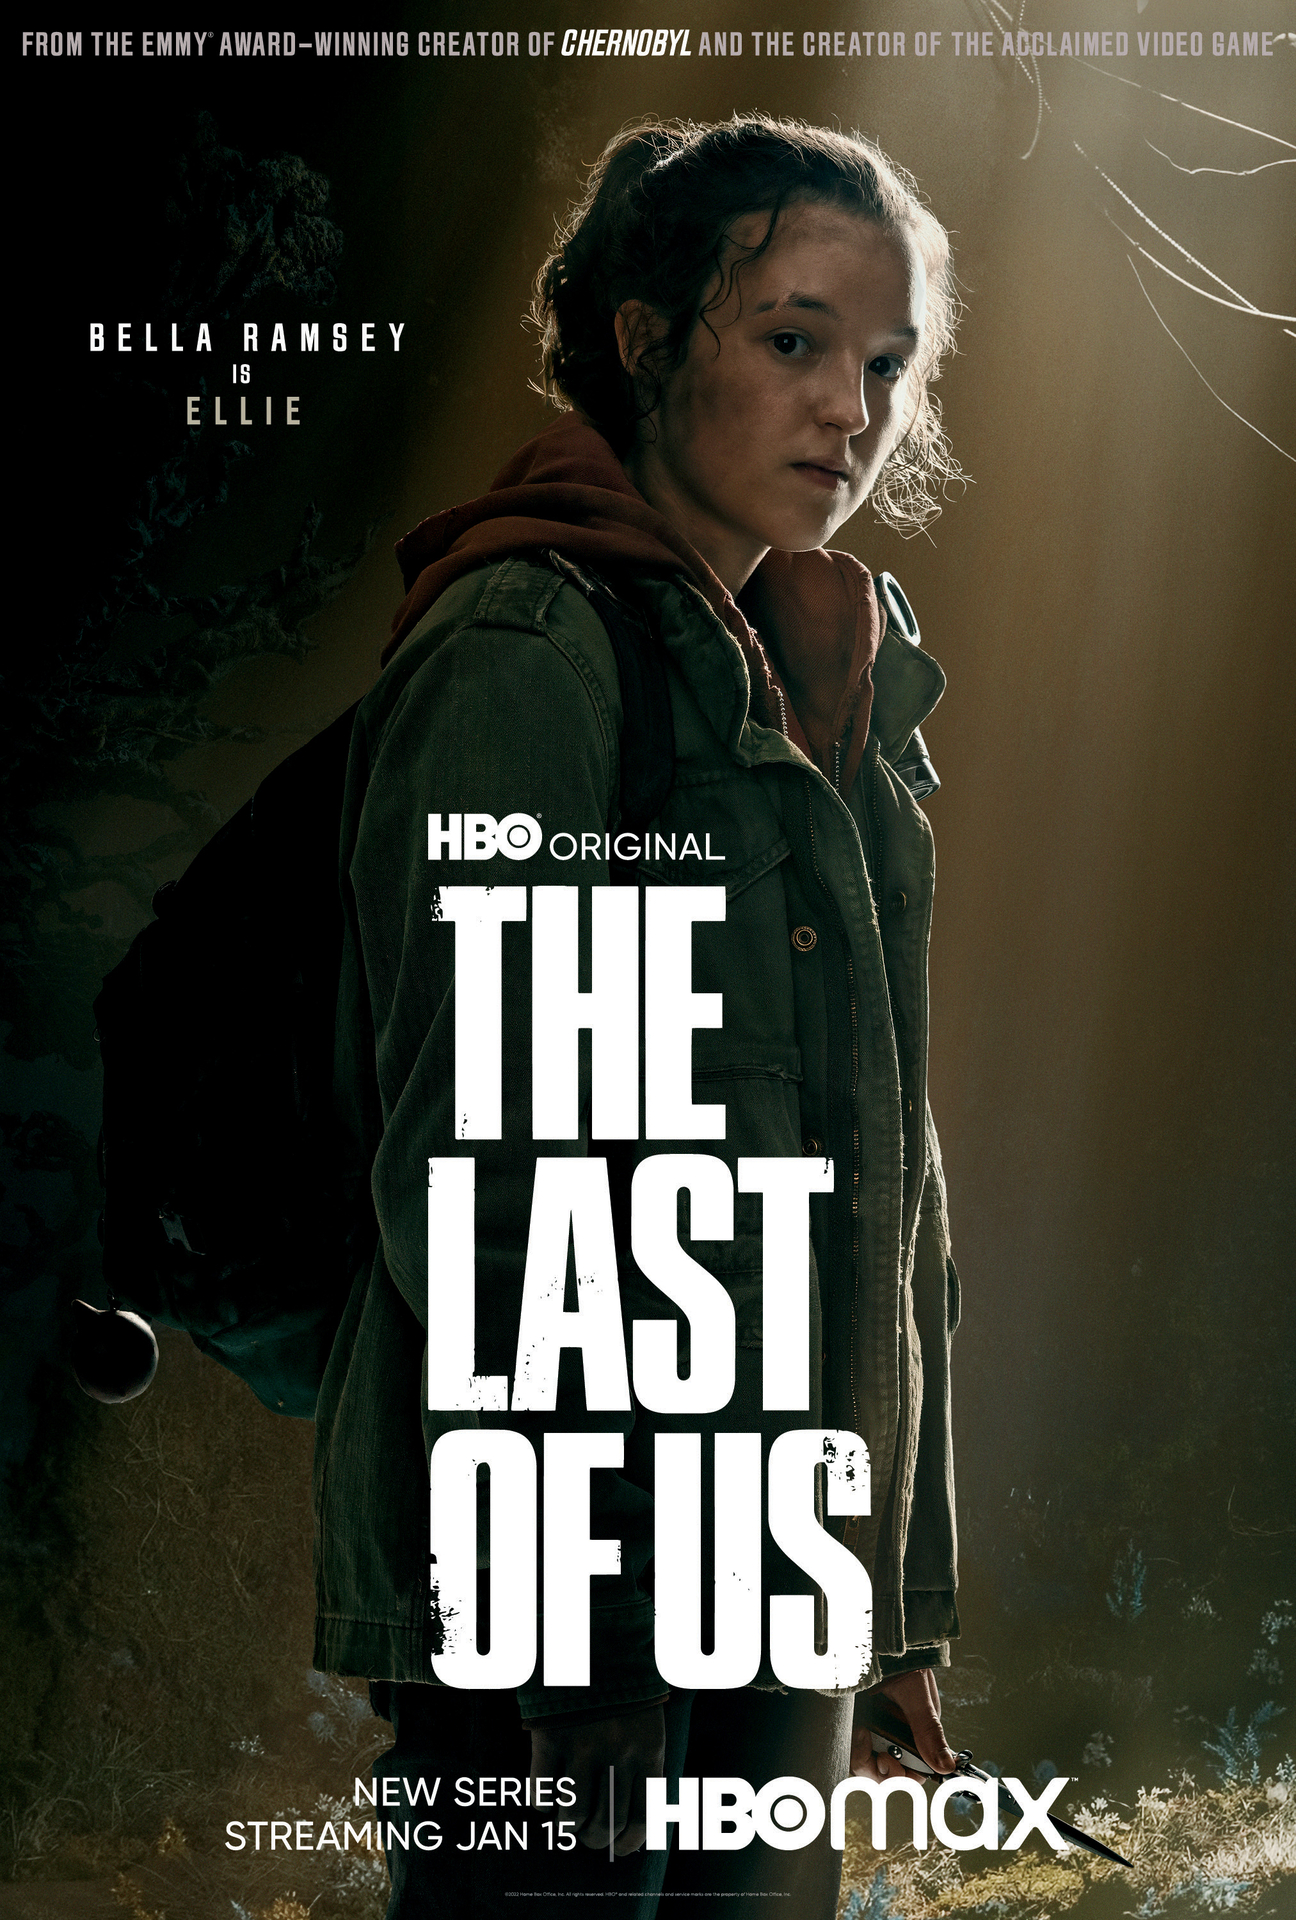 HBO's Live-Action 'The Last Of Us' Series Confirms Race-Swap For